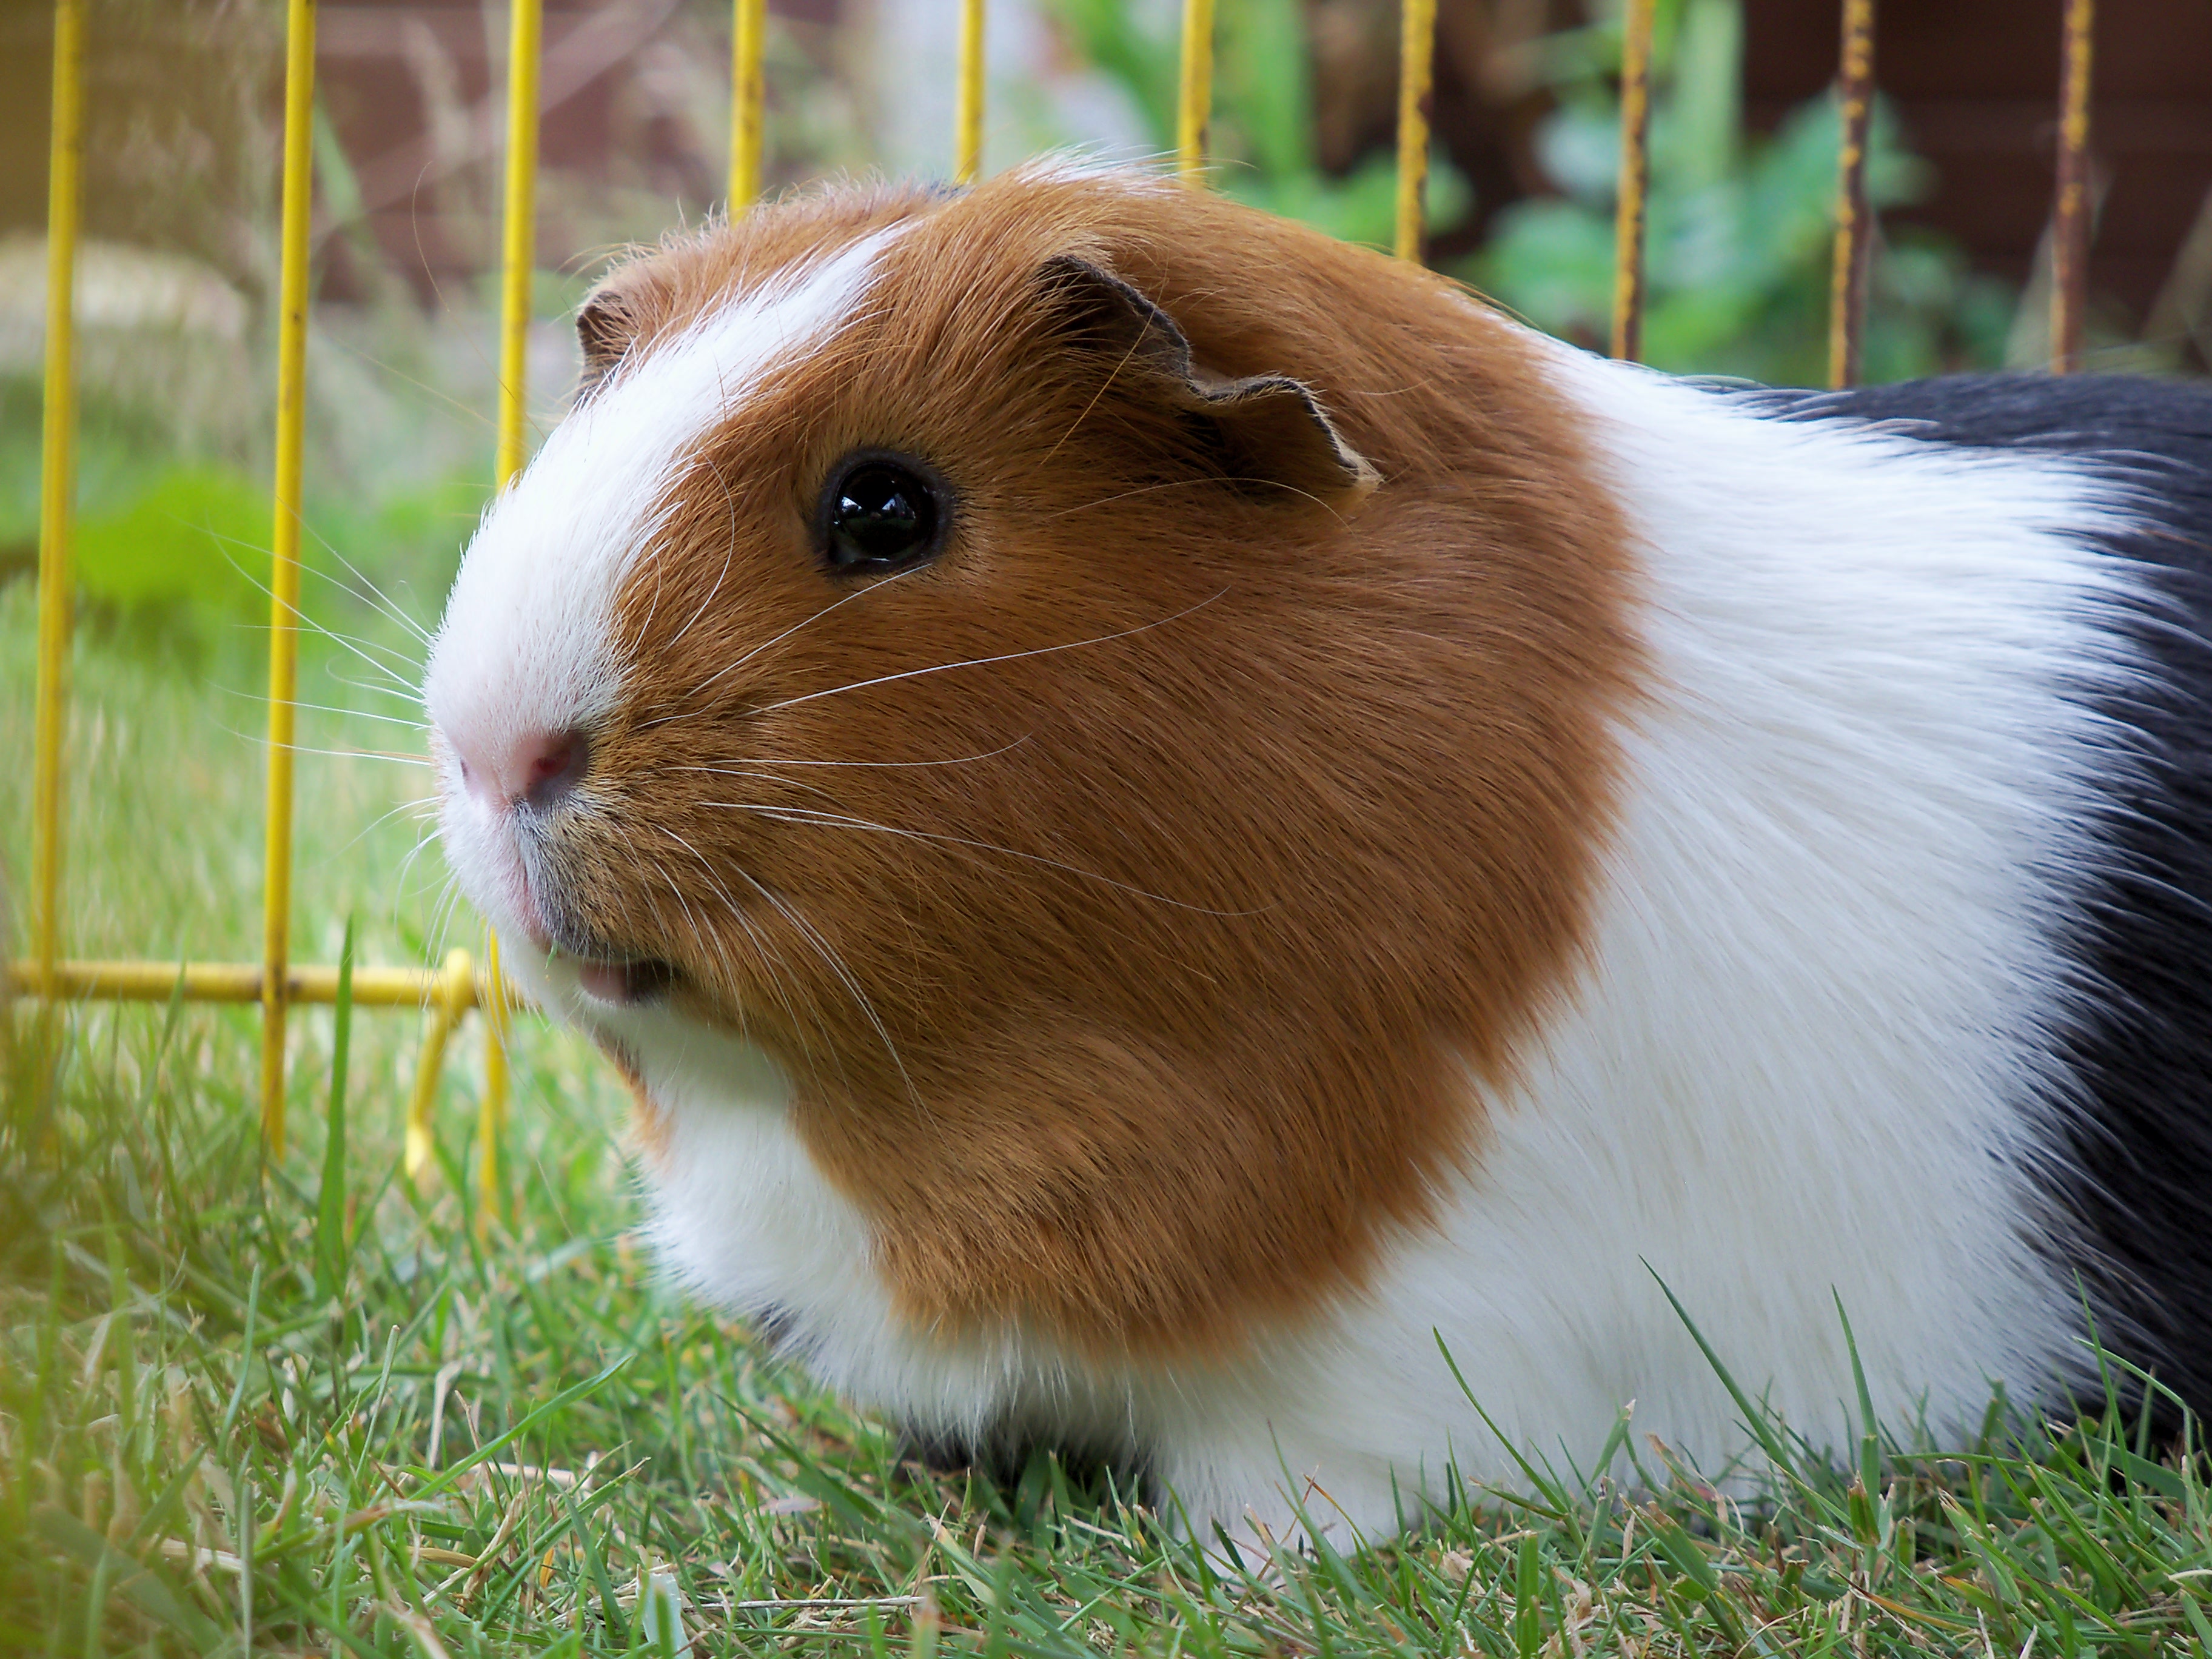 View, Download, Rate, and Comment on this Guinea Pig Image. image,images,pi...